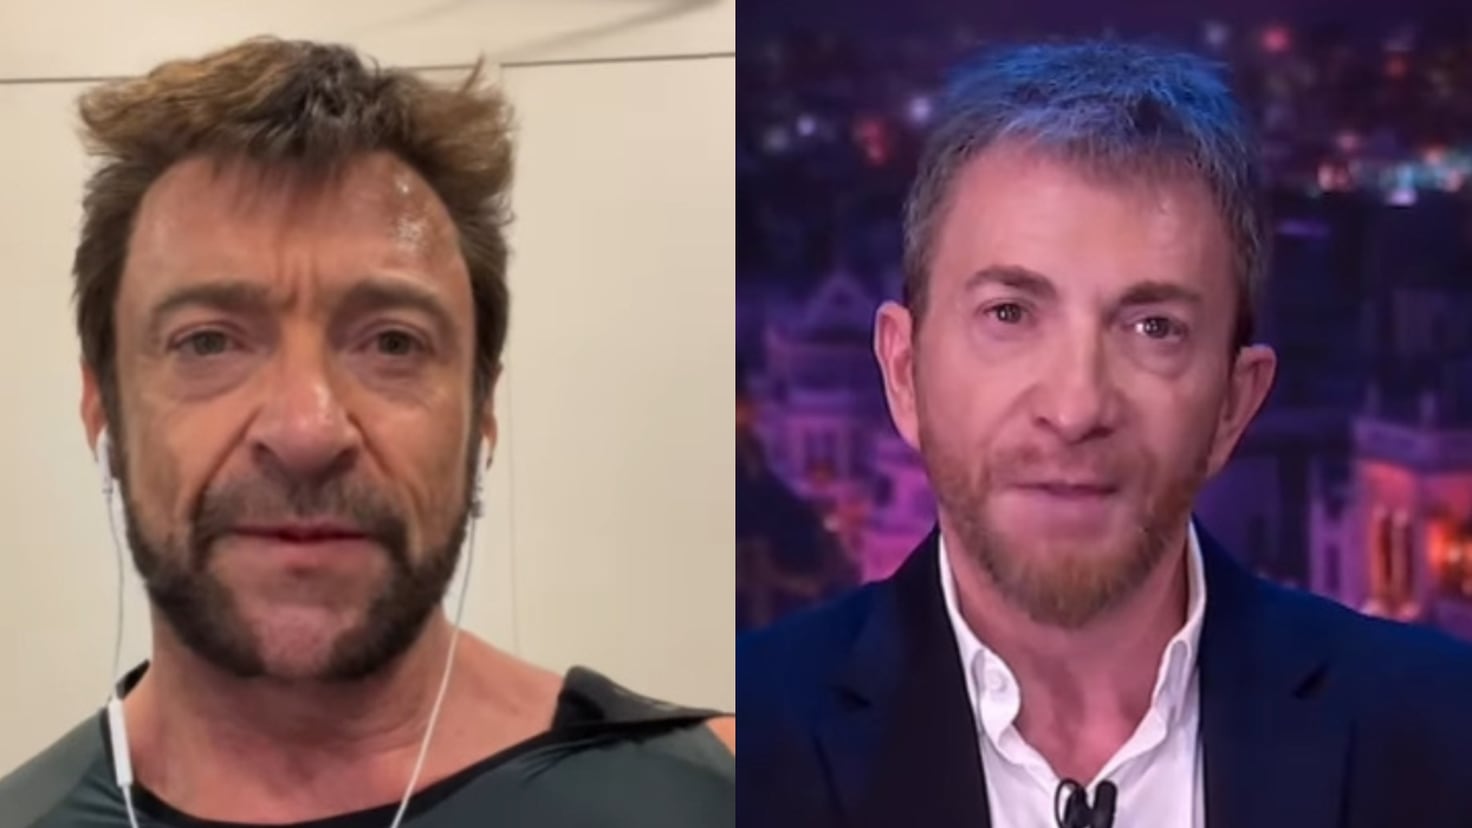 The resemblance between Hugh Jackman and Pablo Motos with which Jennifer Aniston agrees
